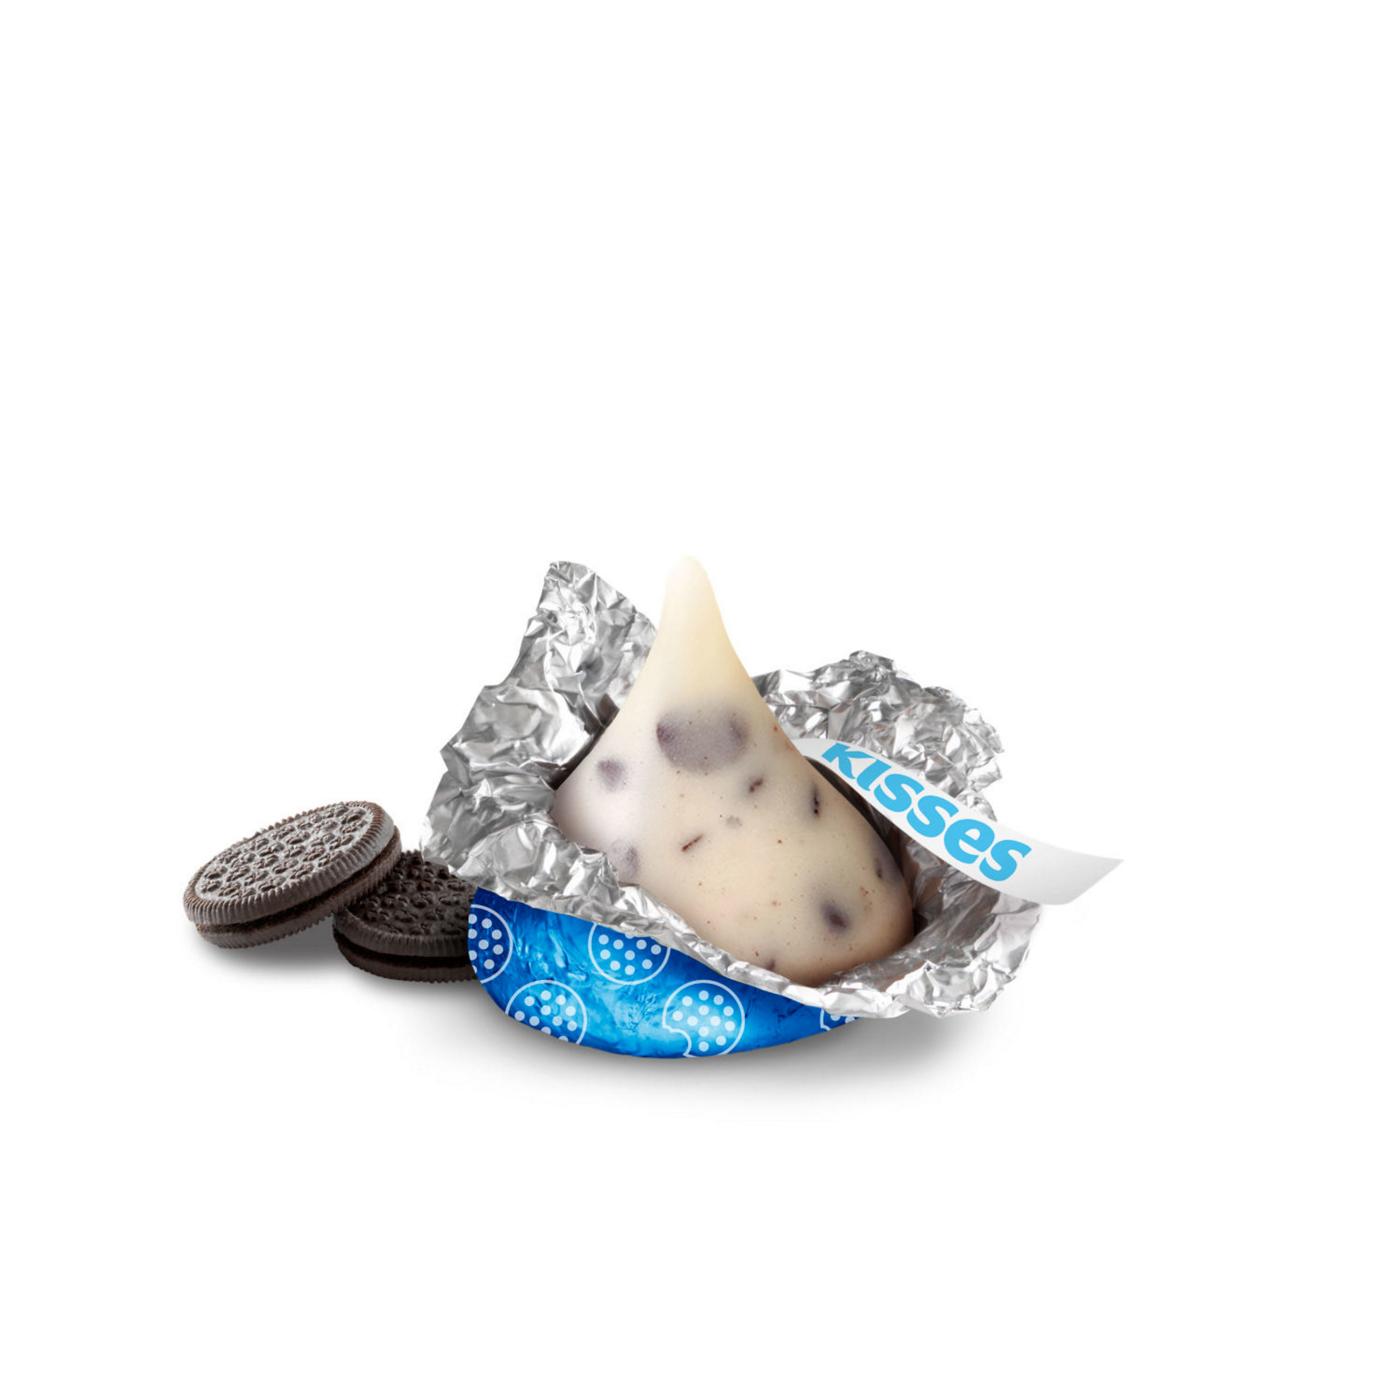 Hershey's Kisses Cookies 'n' Creme Candy - Share Pack; image 2 of 5